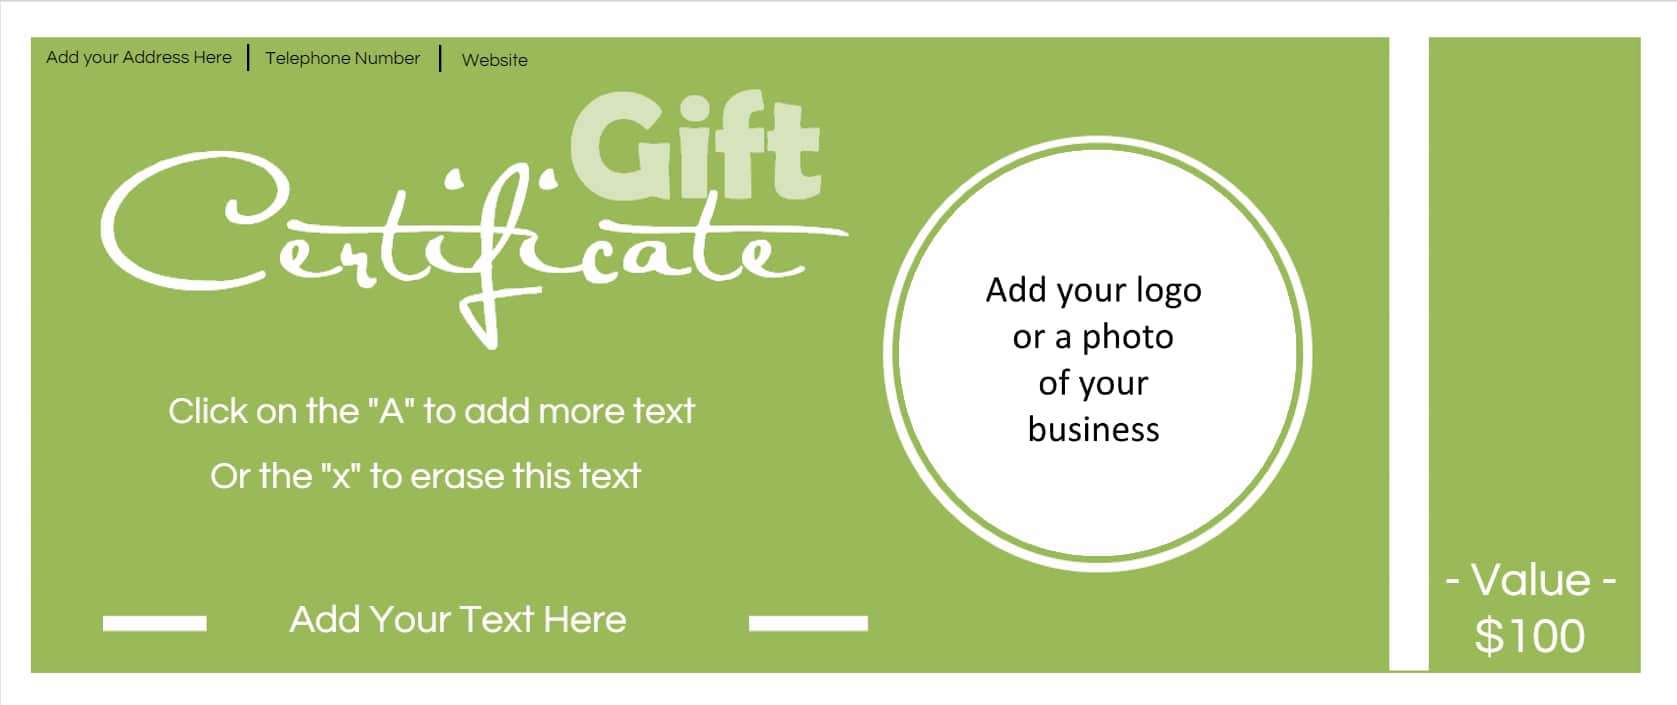 free-business-gift-certificate-template-customize-online